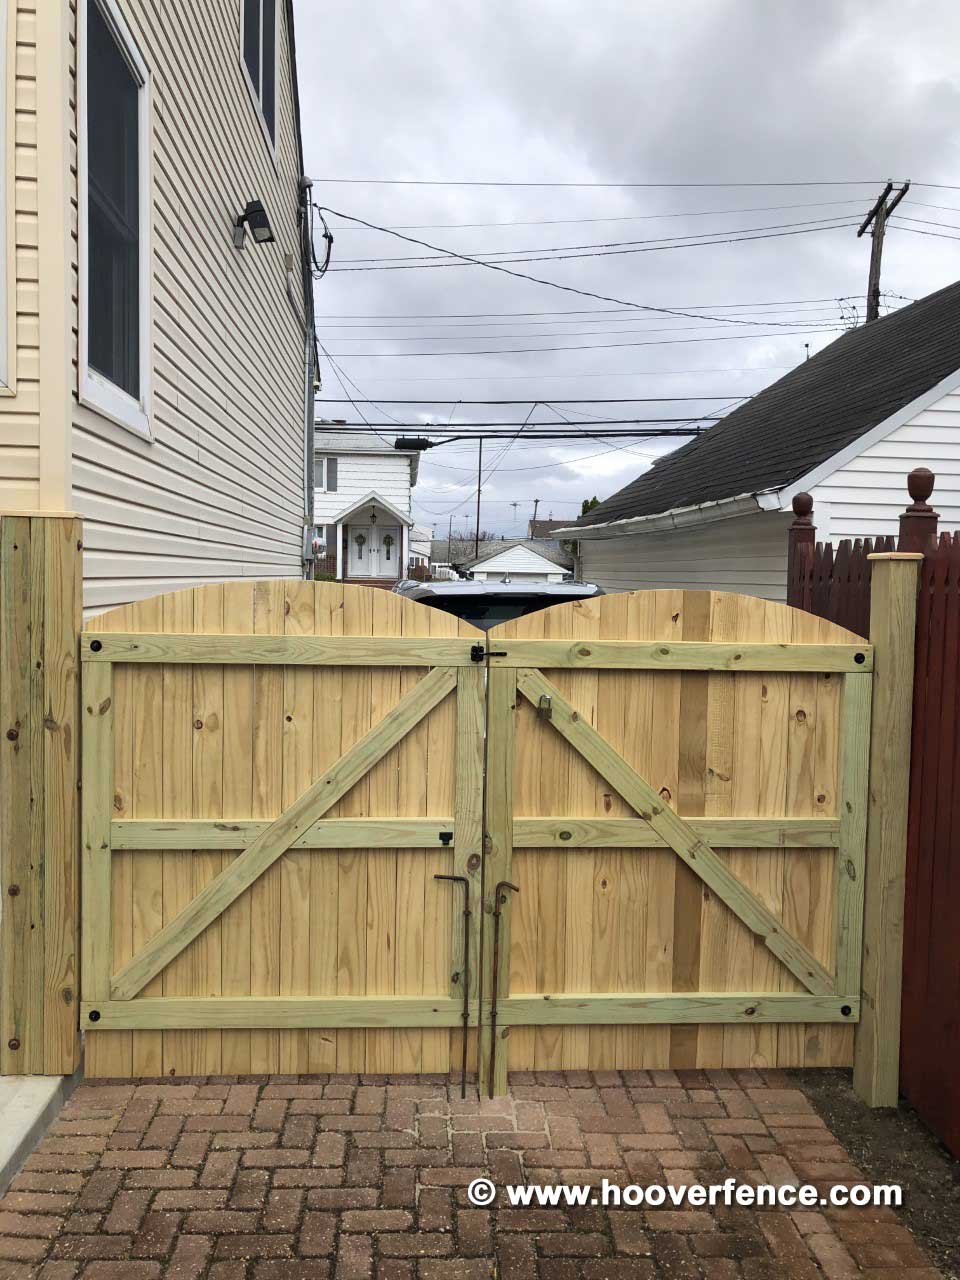 Customer Install - Convex Top Double Wood Gate Hung Using Snug Cottage 8292-18SP Old Fashioned Heavy Duty Hinges